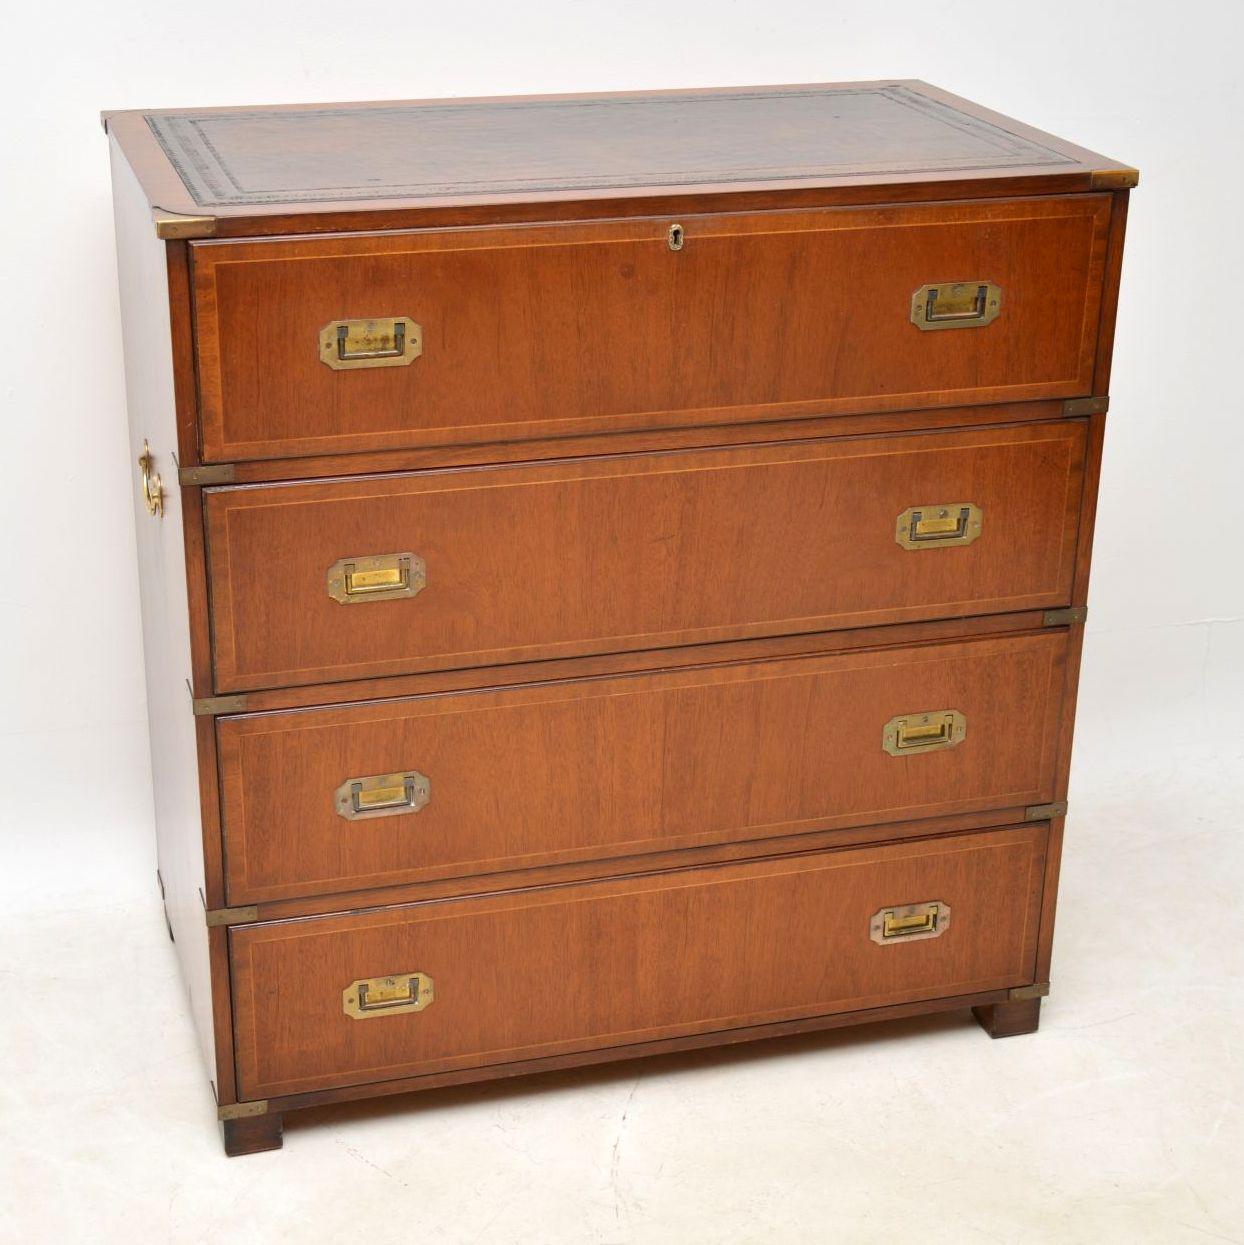 Right now there are a matching pair of bedside chests on the site to go with this piece & they would all go well together in the same room. This mahogany secrétaire chest of drawers is antique military style & dates from circa 1950s period. The